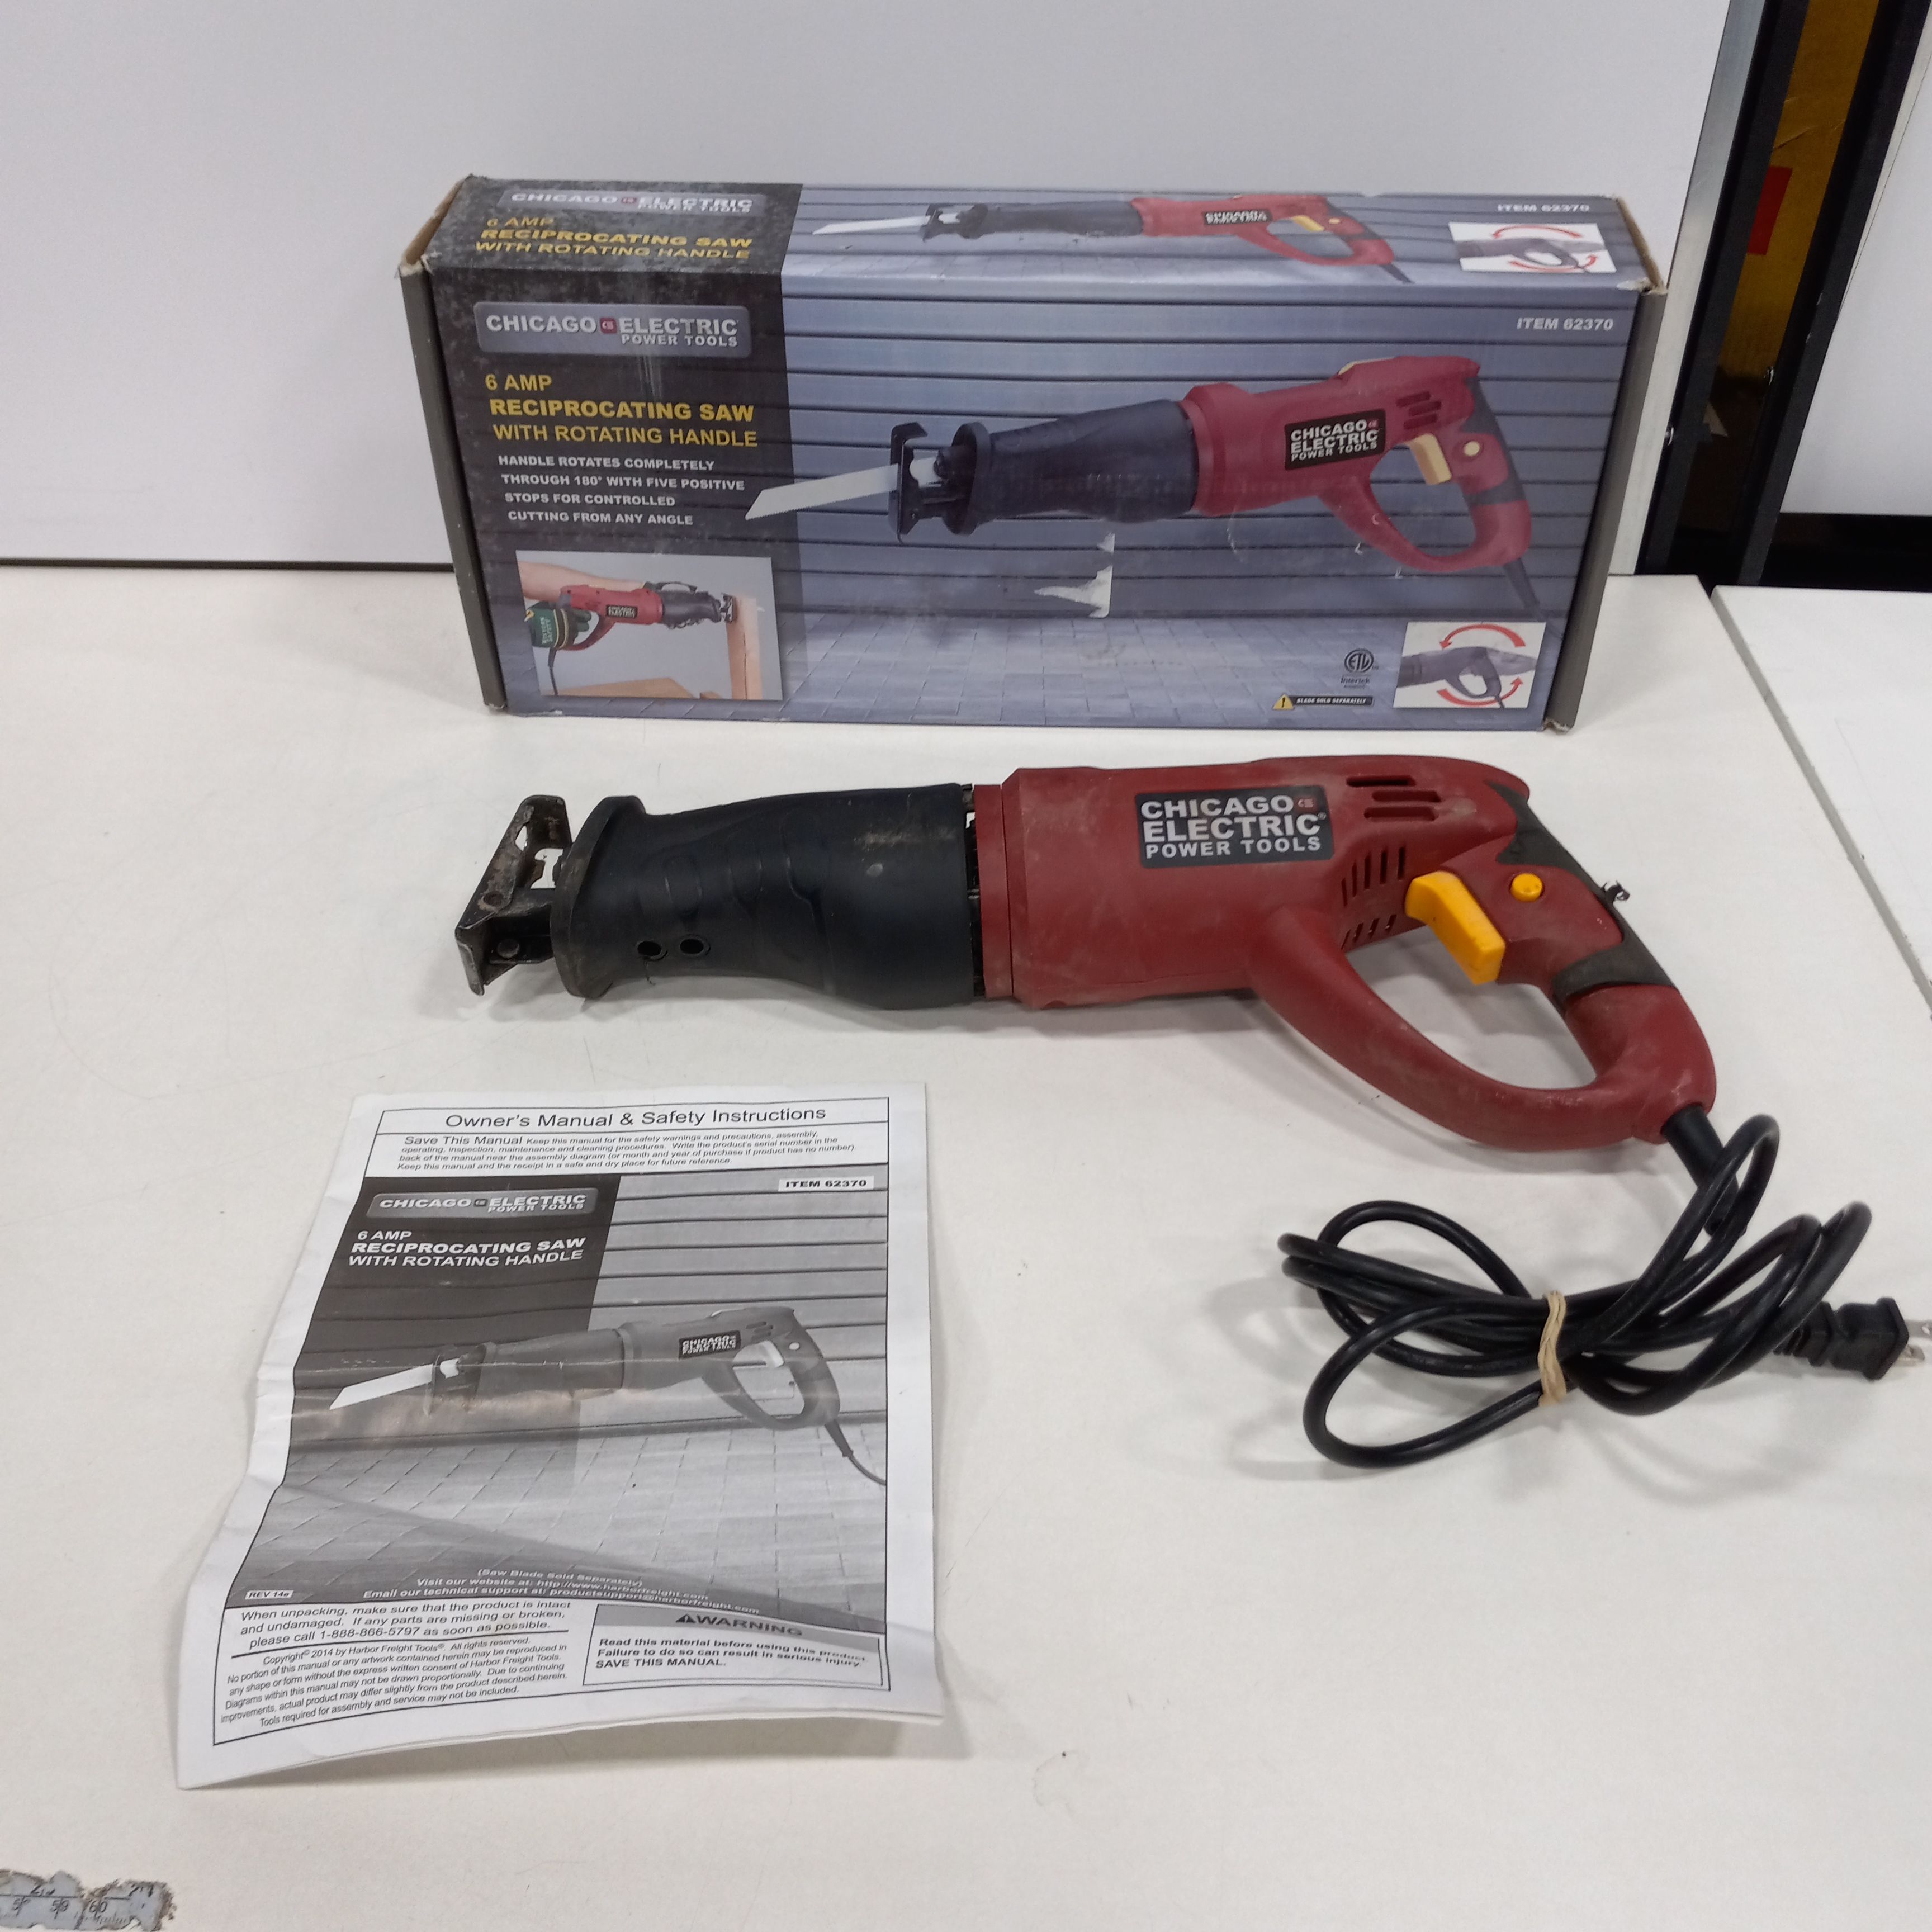 Buy the Chicago Electric Power Tools Reciprocating Saw GoodwillFinds